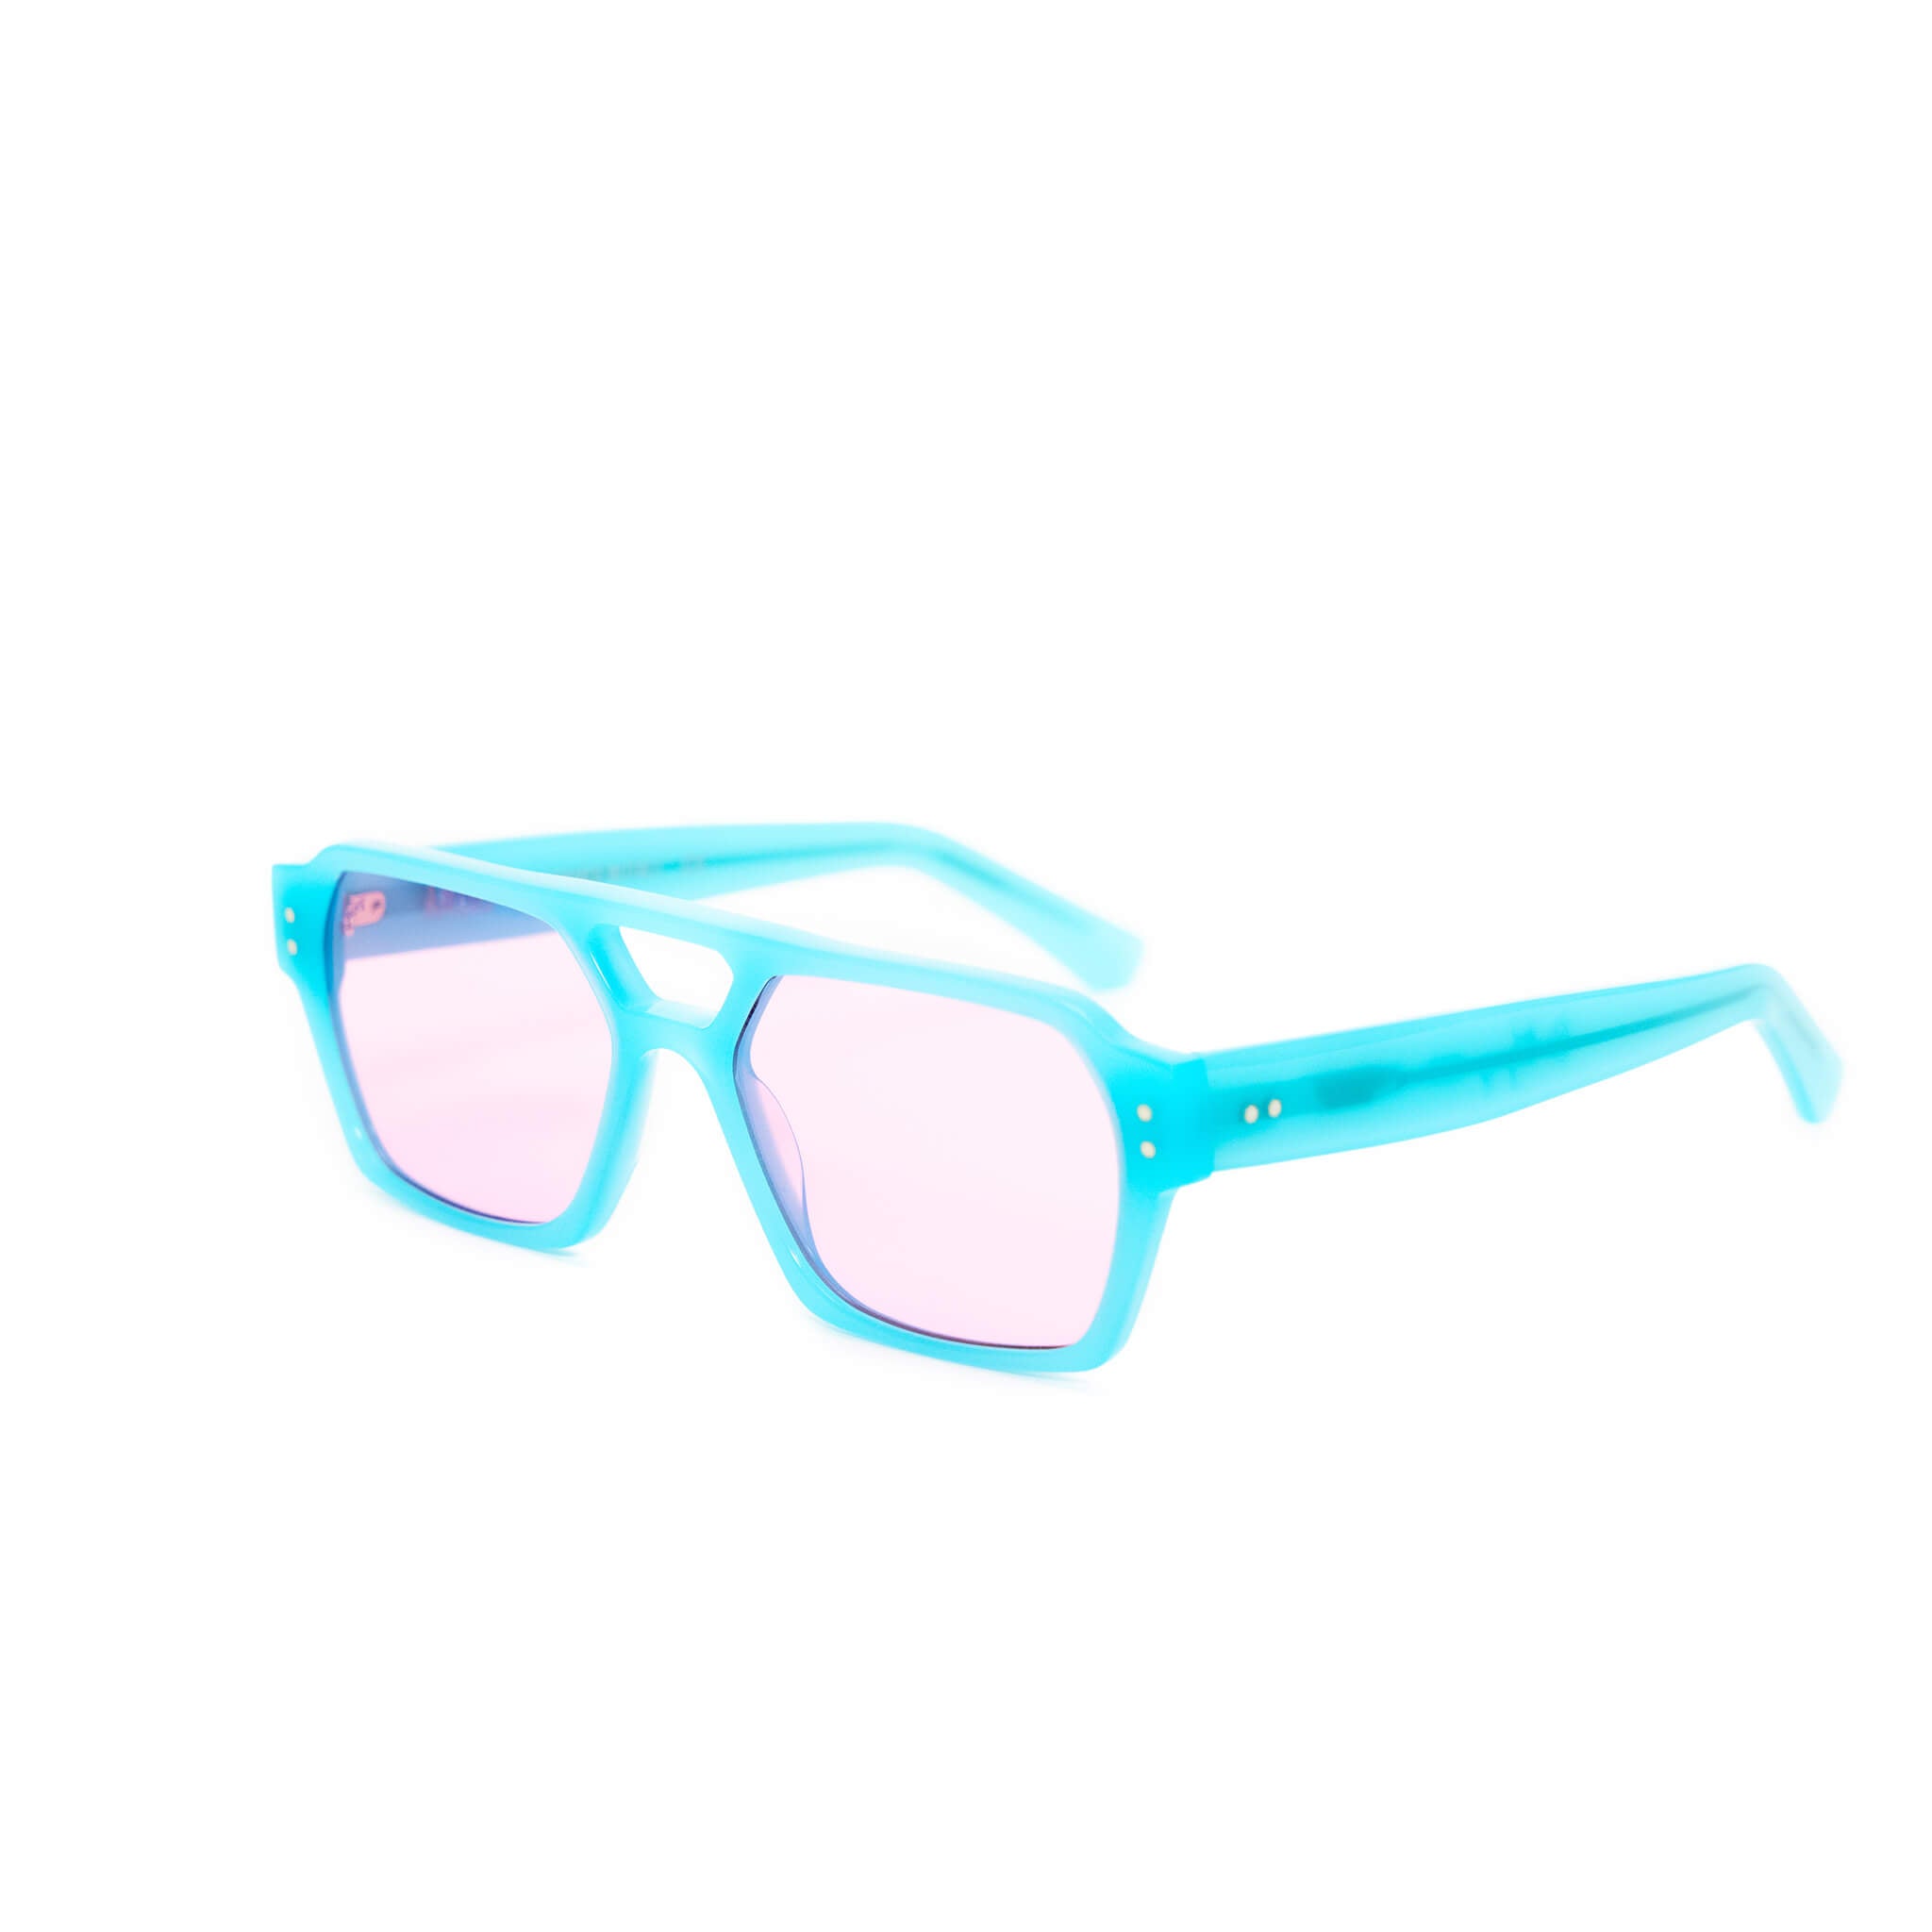 Ego sunglasses in opal blue and pink from Ameos side angle